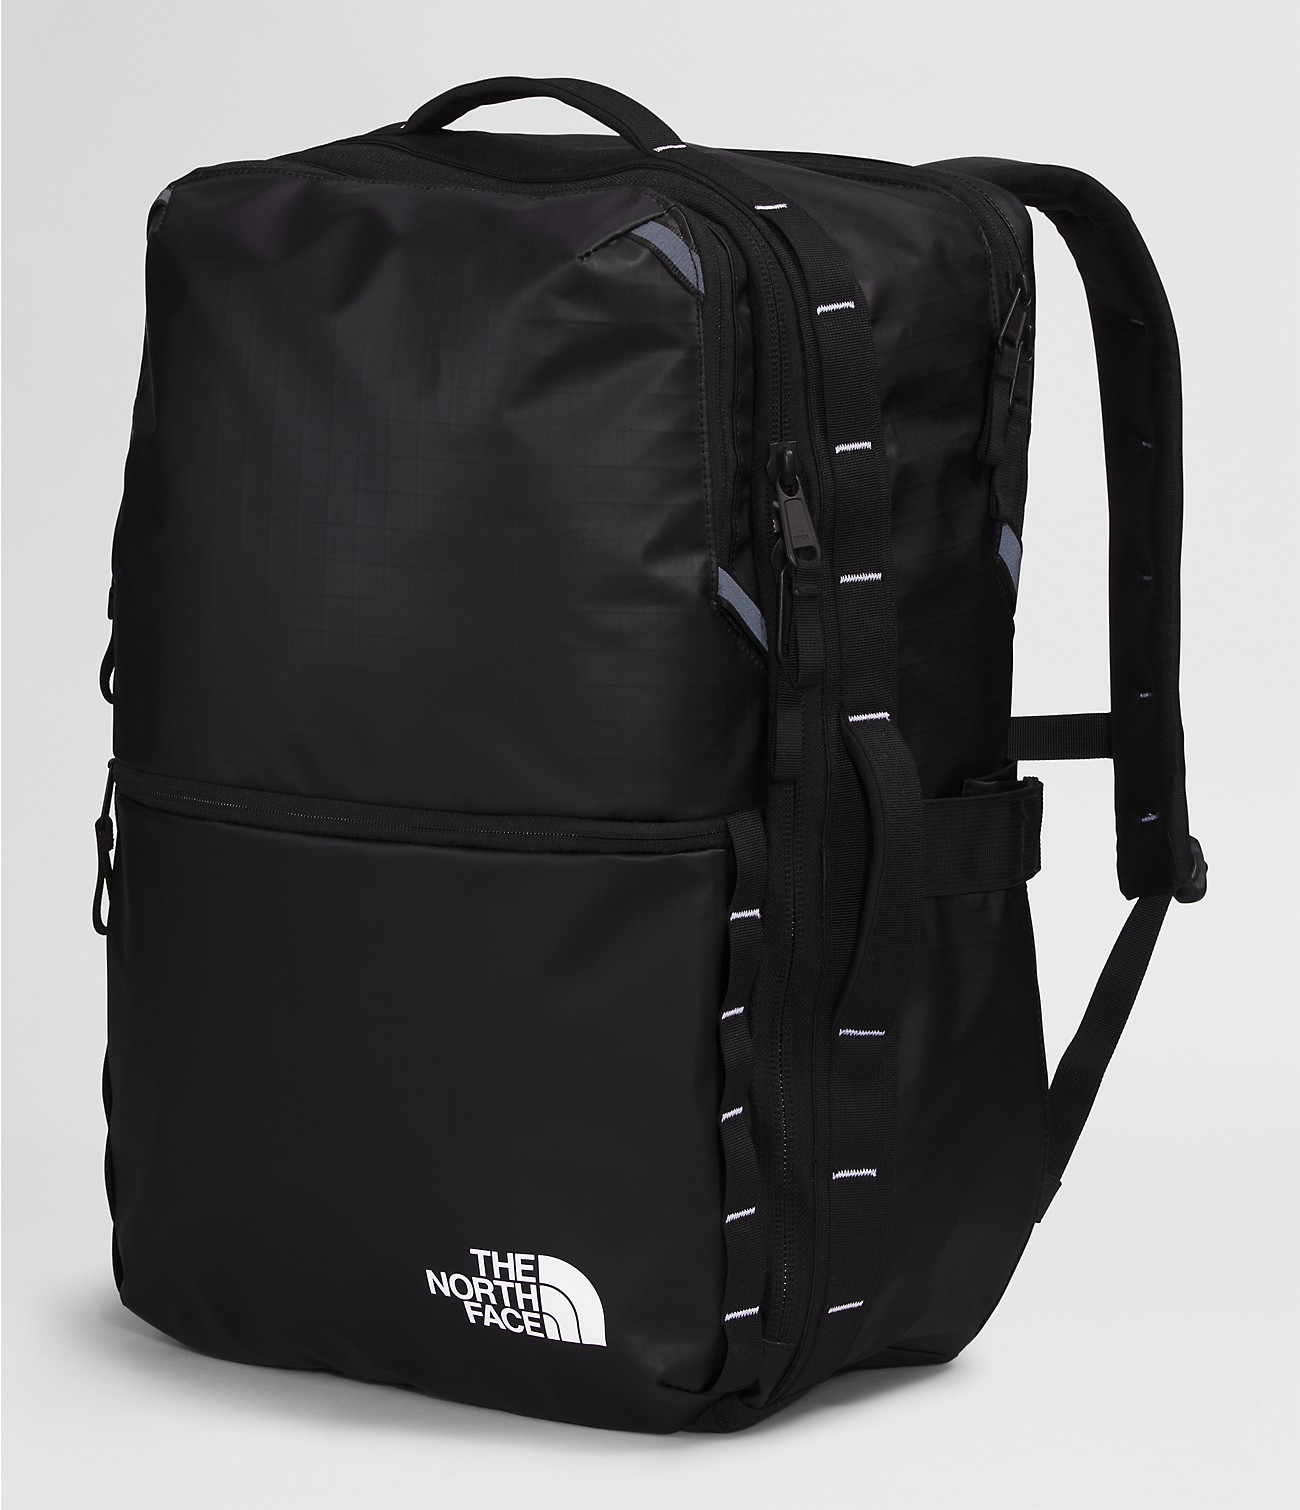 Unlock Wilderness' choice in the Deuter Vs North Face comparison, the Base Camp Voyager Travel Pack by The North Face